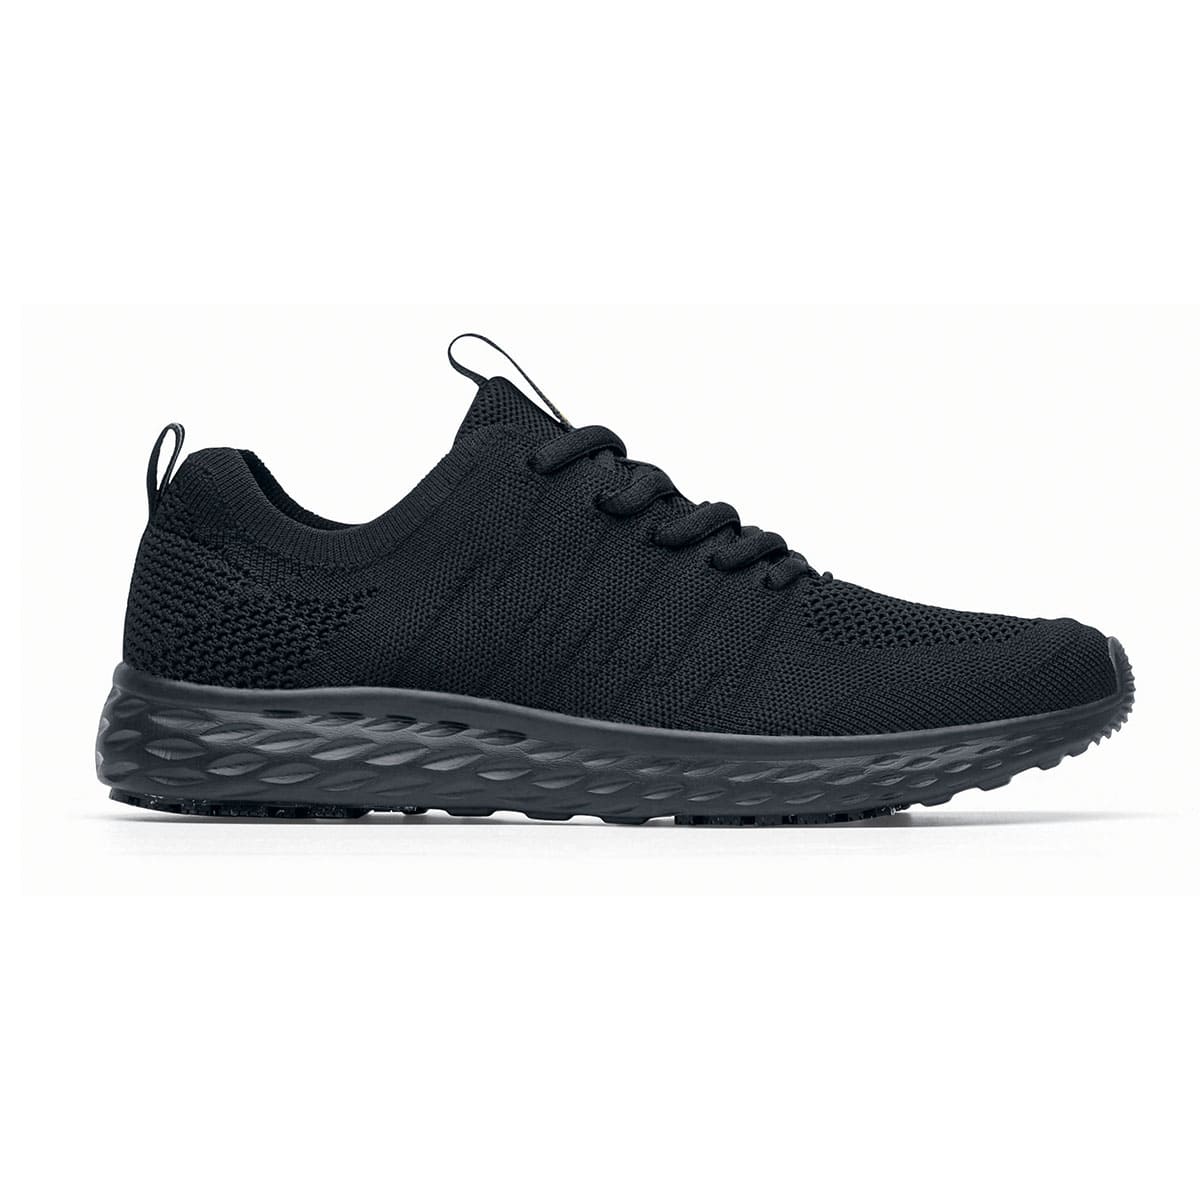 The Everlight™ Everlight Eco Women's Black from Shoes For Crews are lightweight and breathable slip-resistant trainers made from recycled materials, seen from the right.